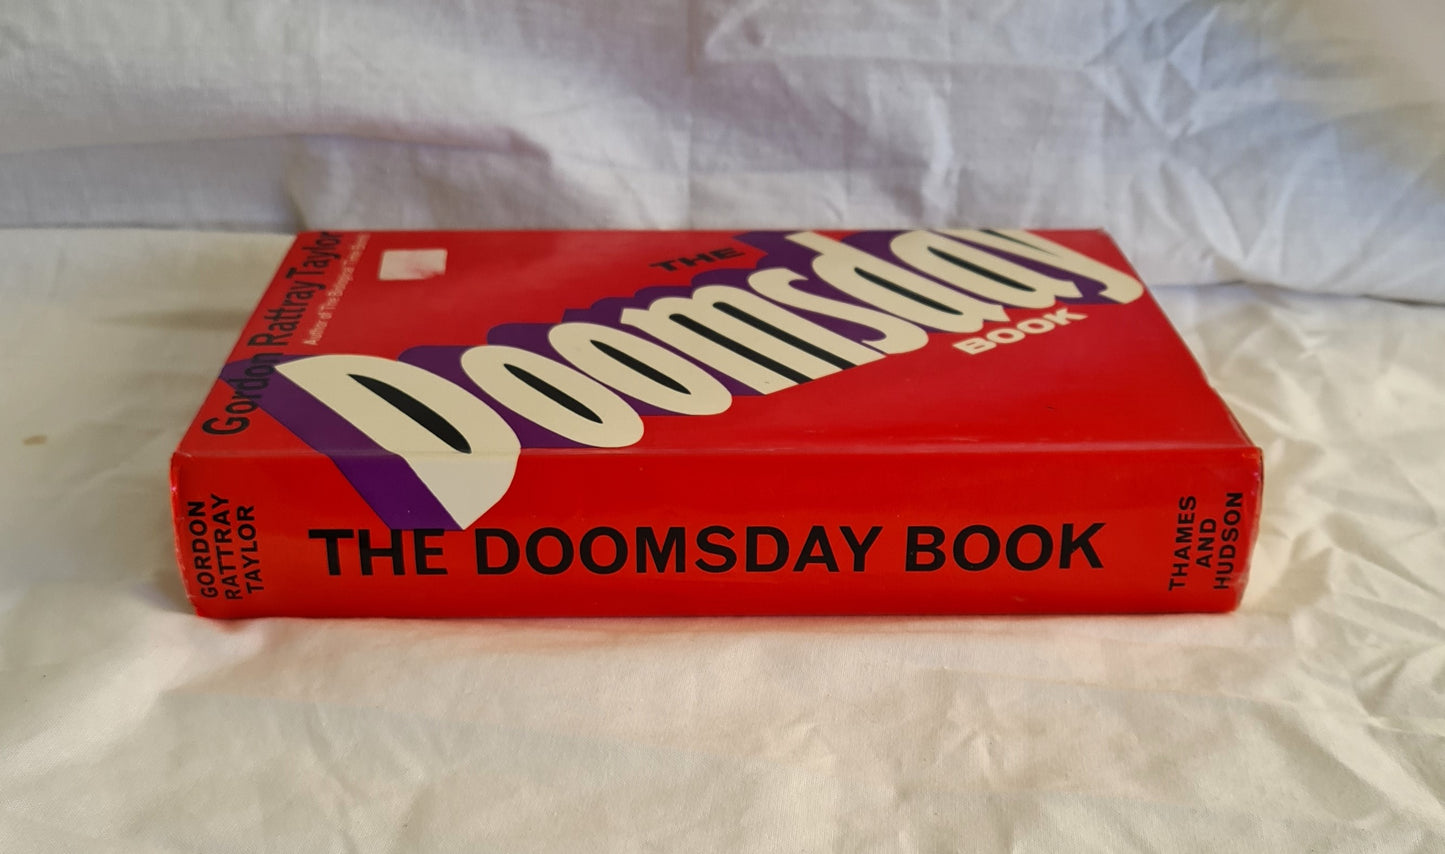 The Doomsday Book by Gordon Rattray Taylor